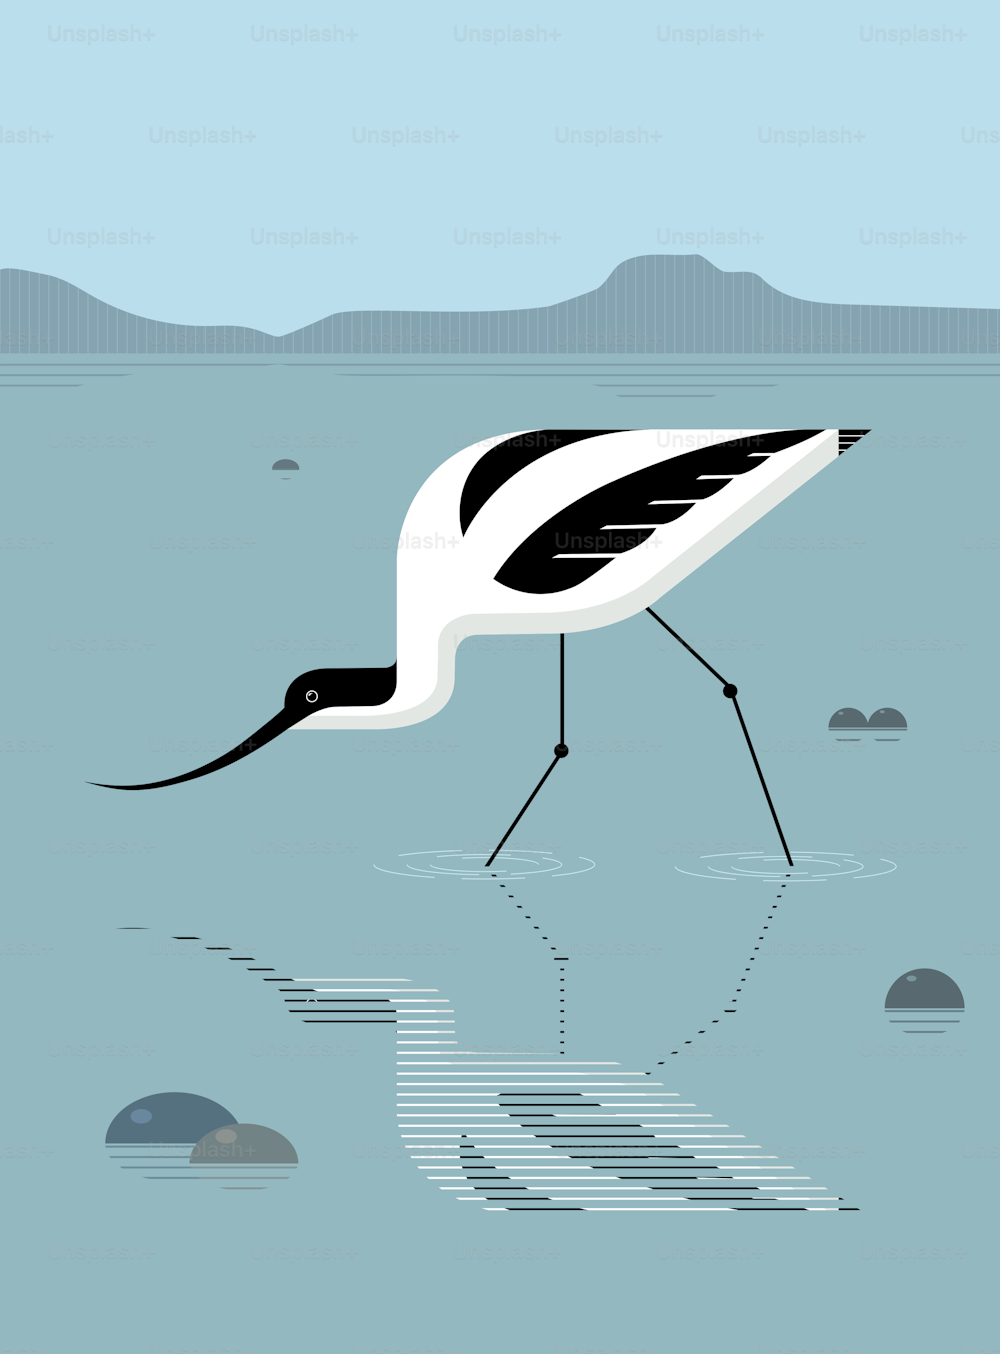 Avocet foraging in the river, stylized image, vector